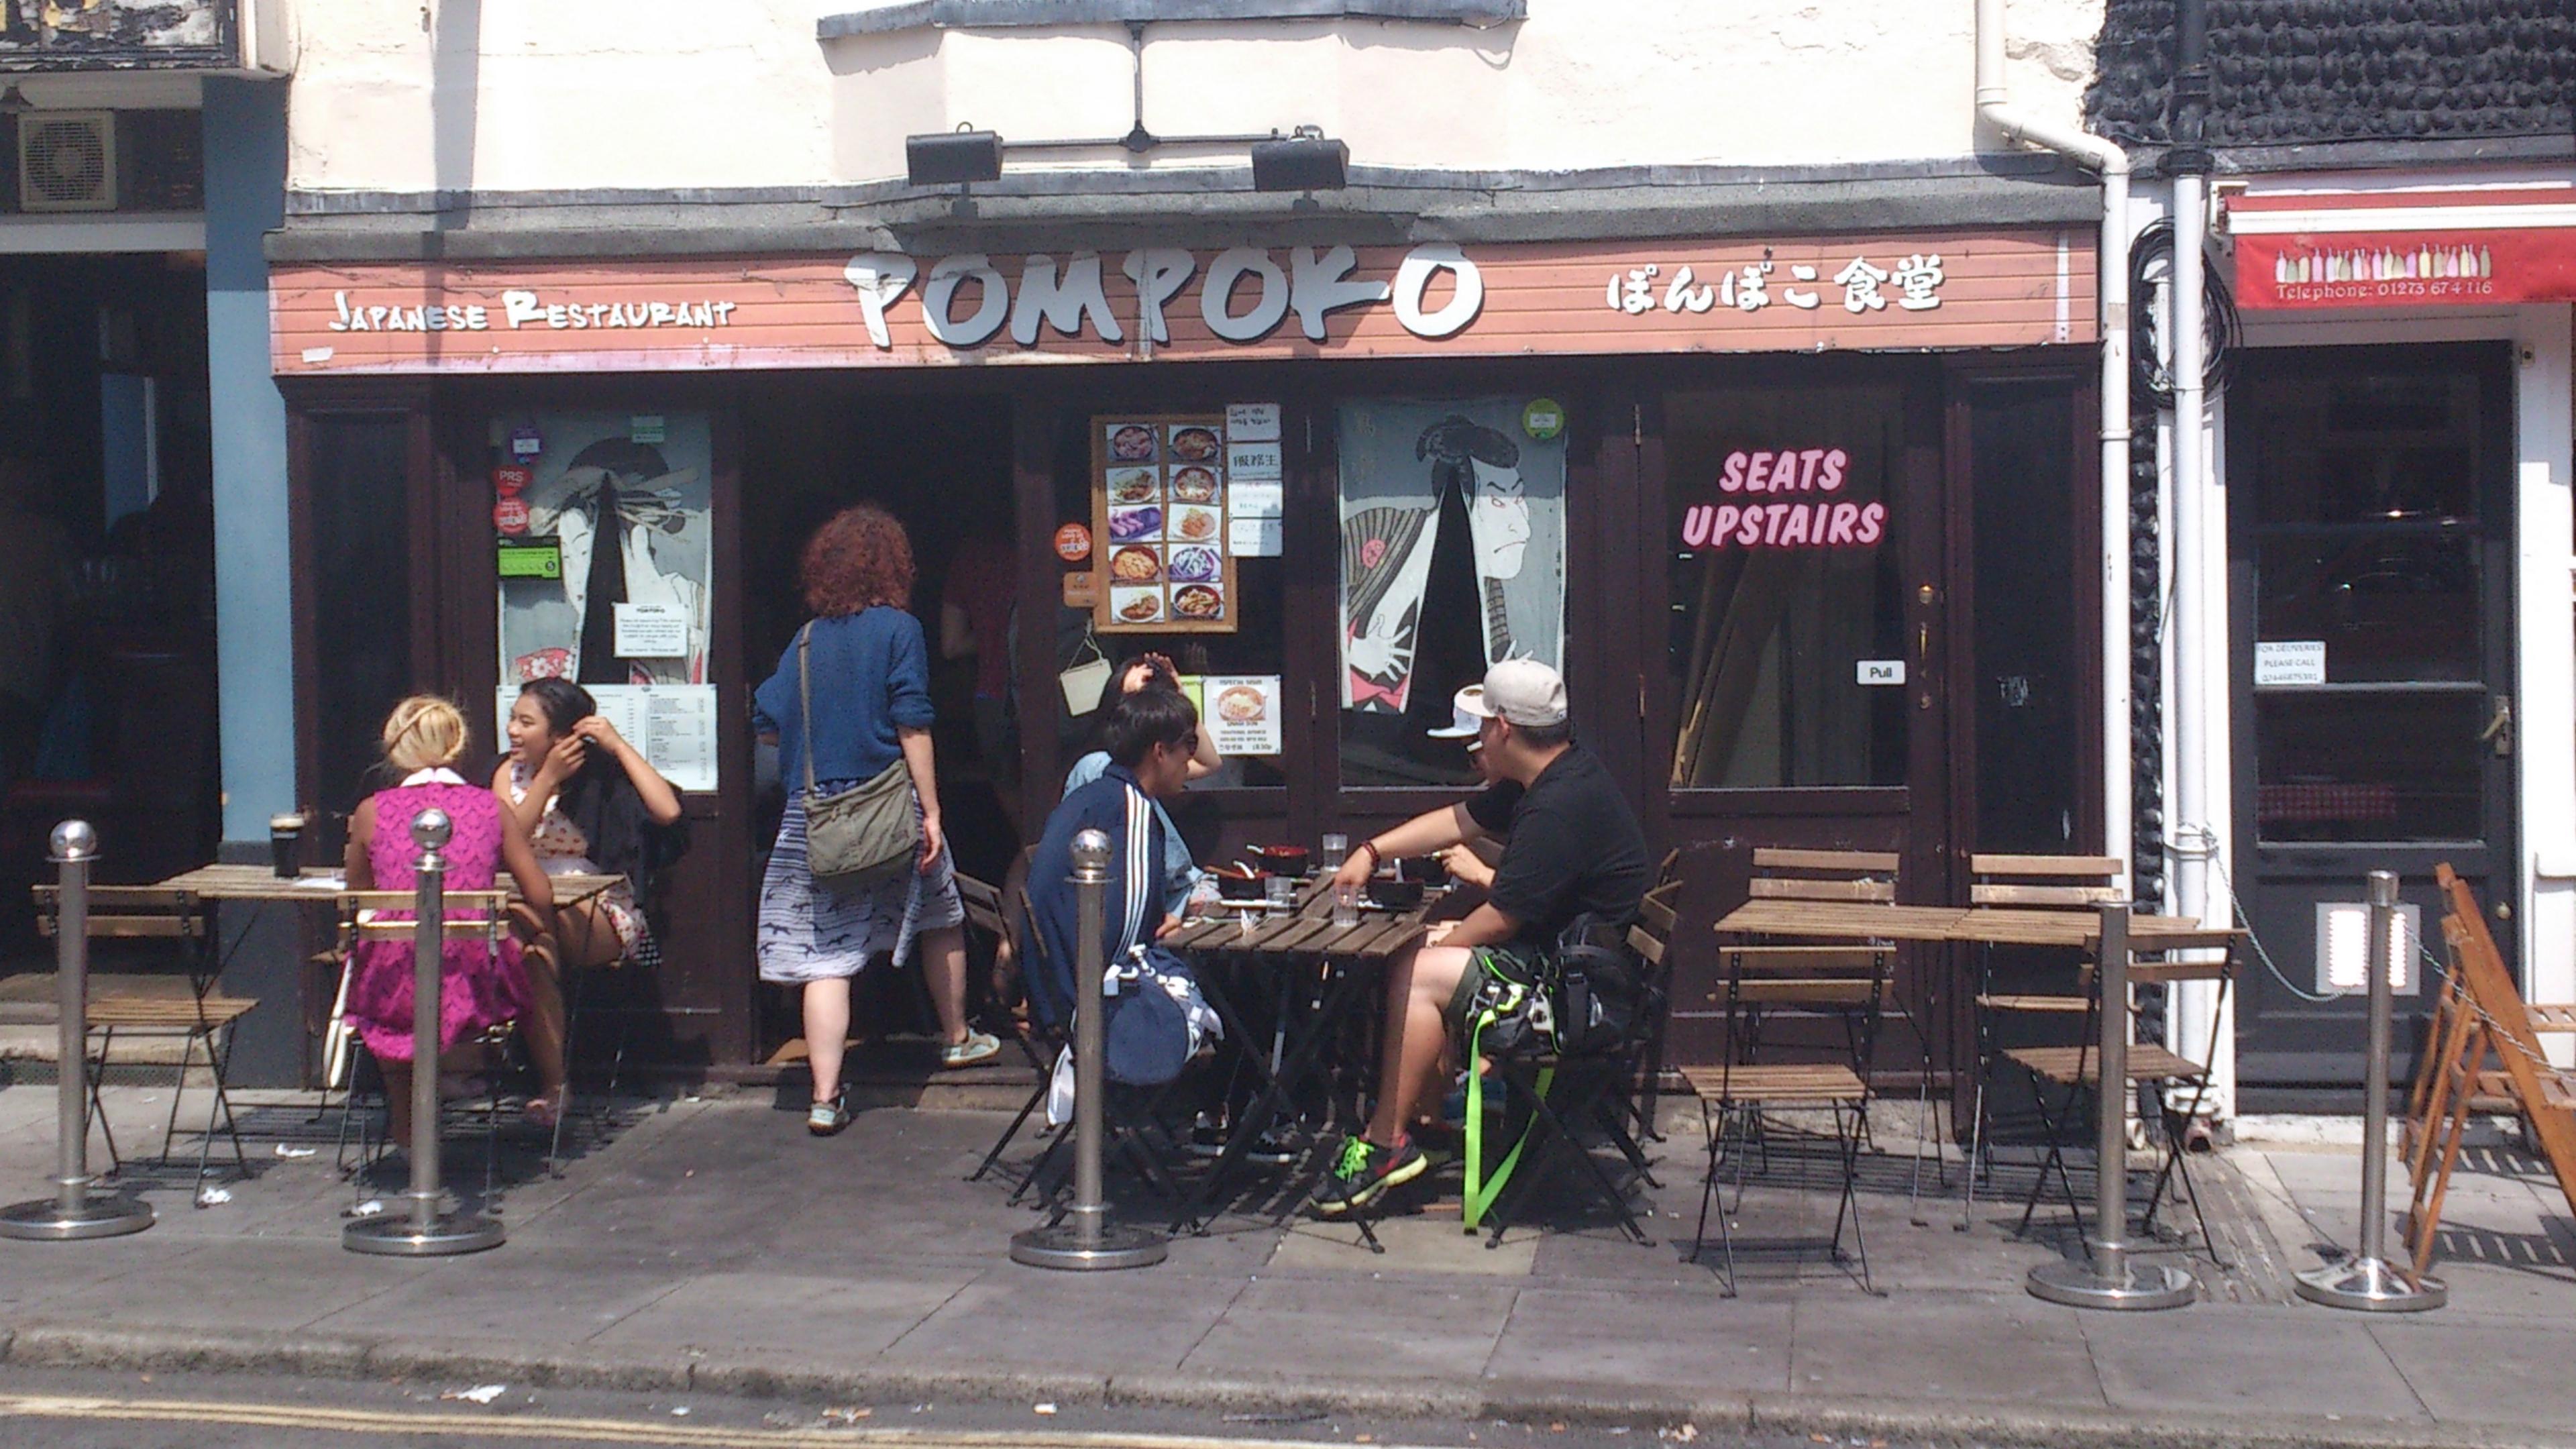 Cover image of this place Pompoko